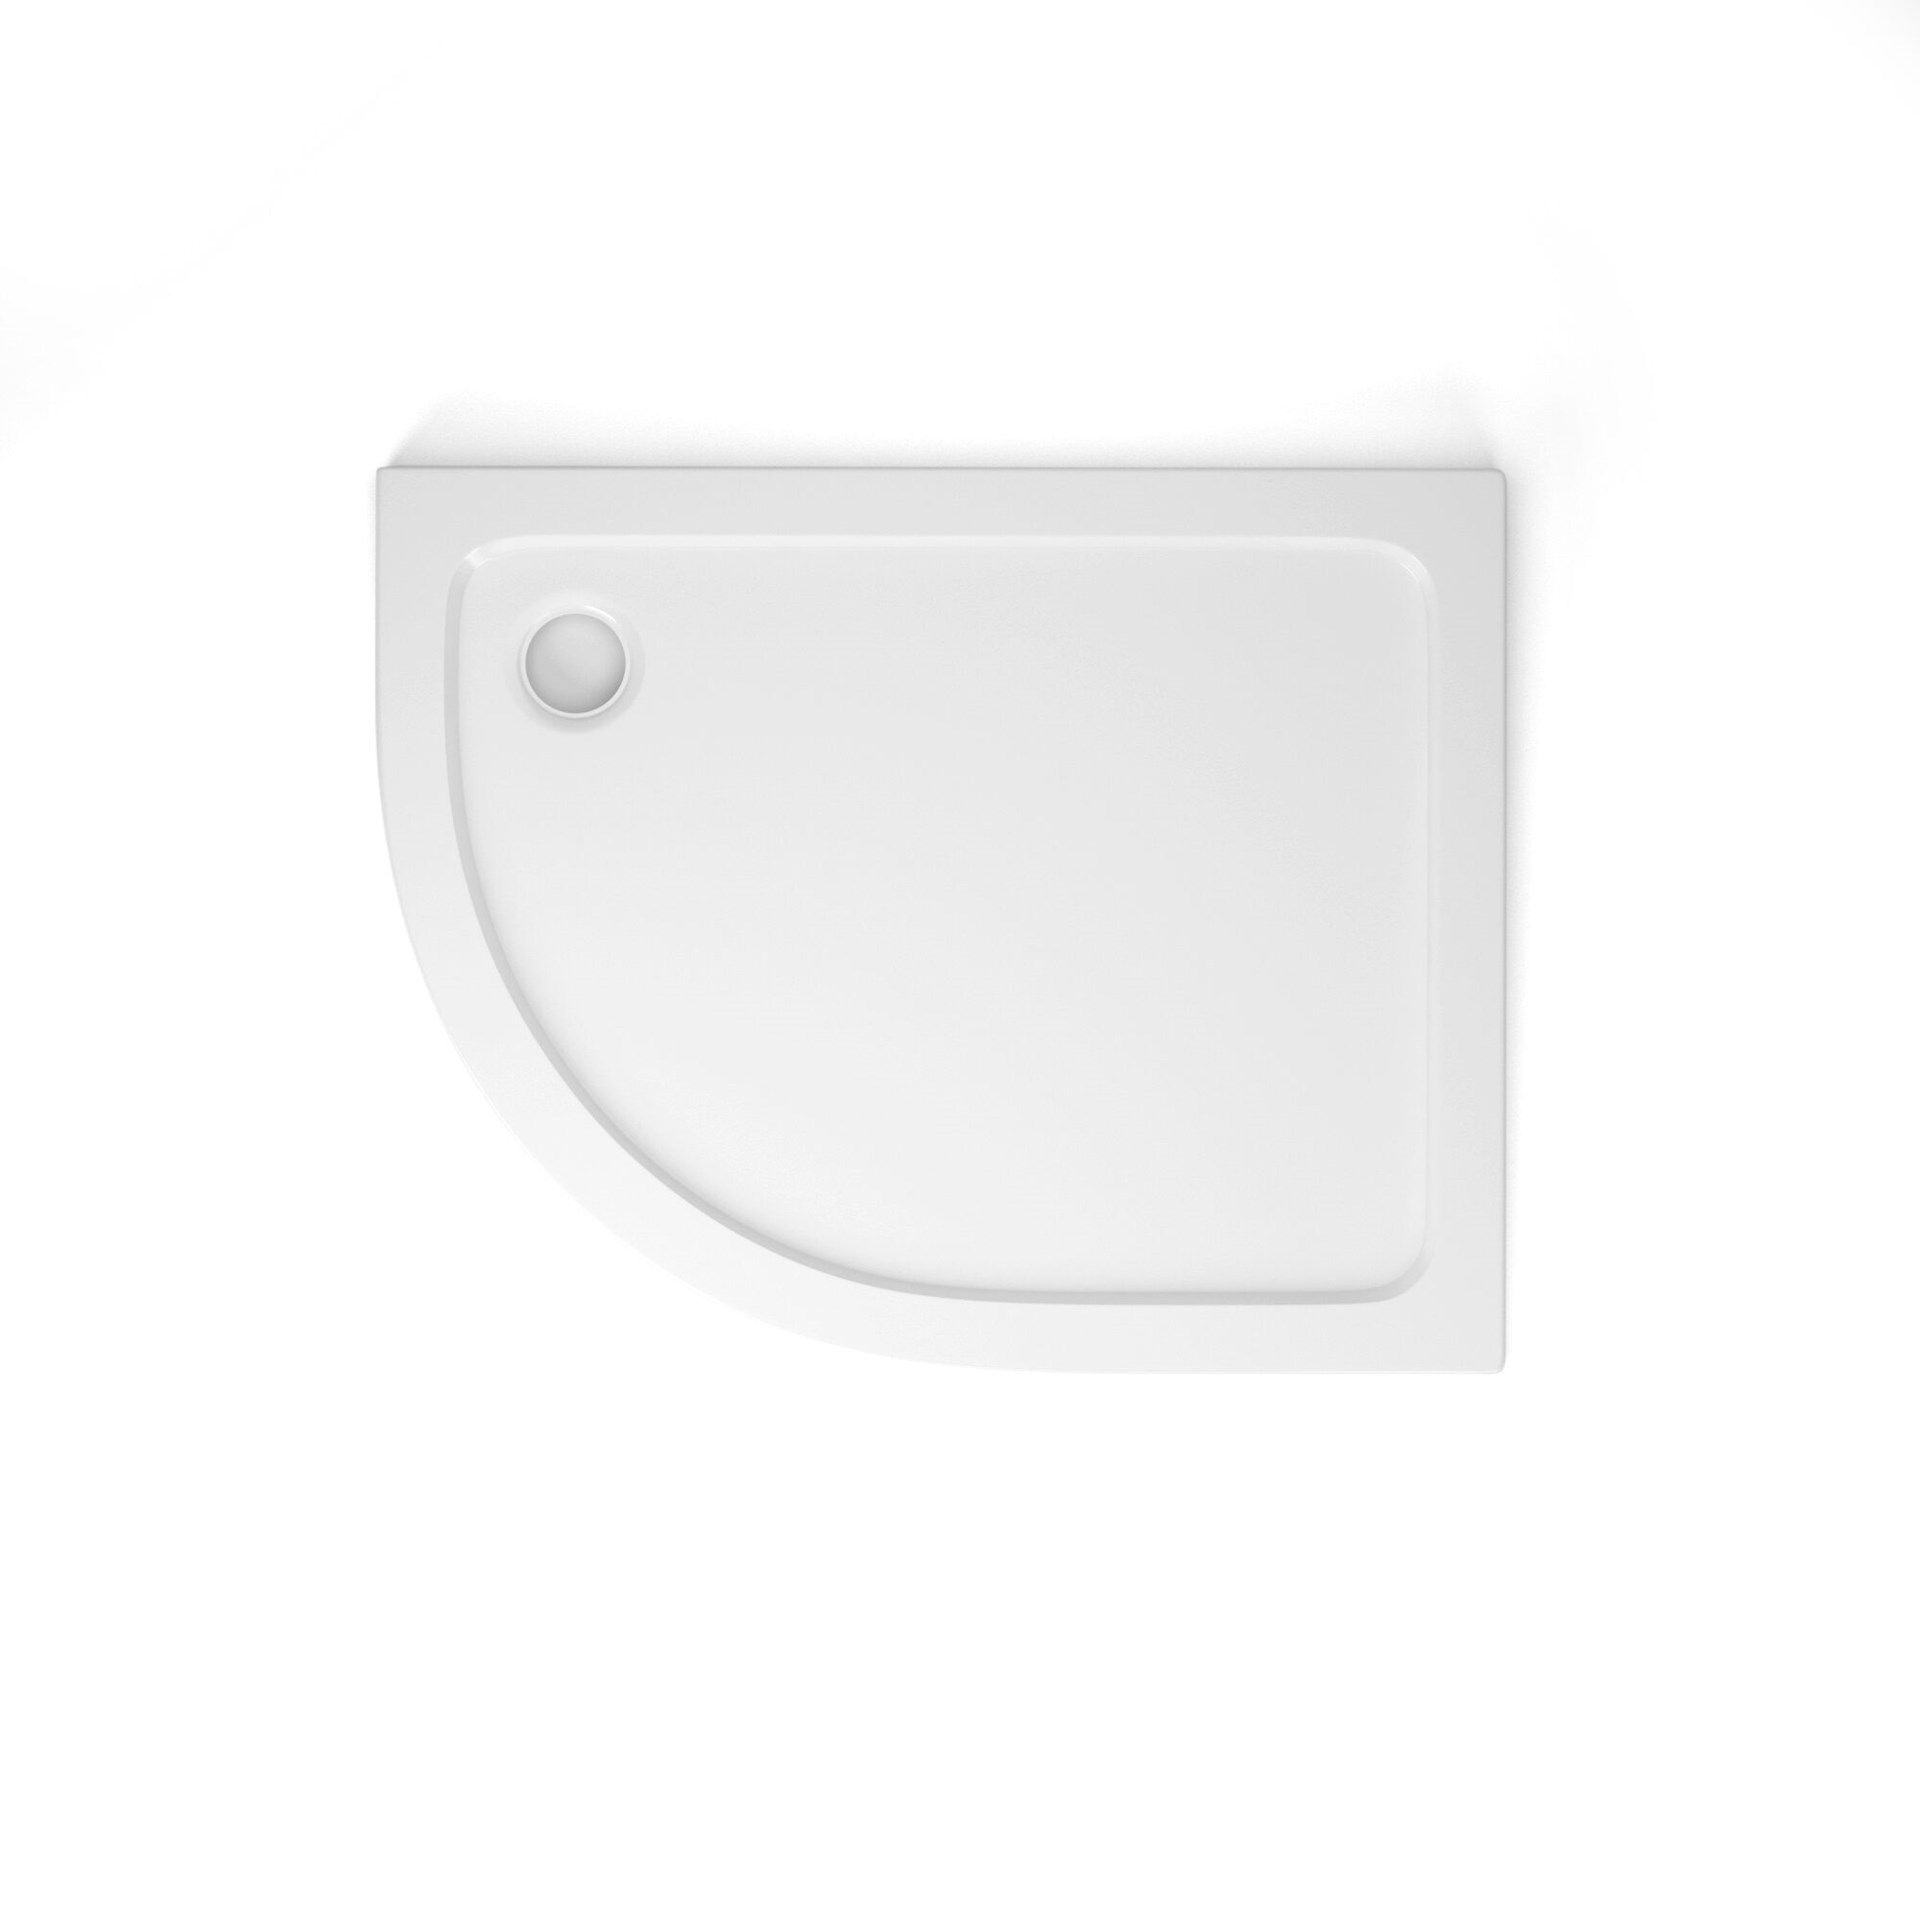 (A111) 1000x800mm Offset Quadrant Ultra Slim Stone Shower Tray - Left.Constructed from acrylic ...